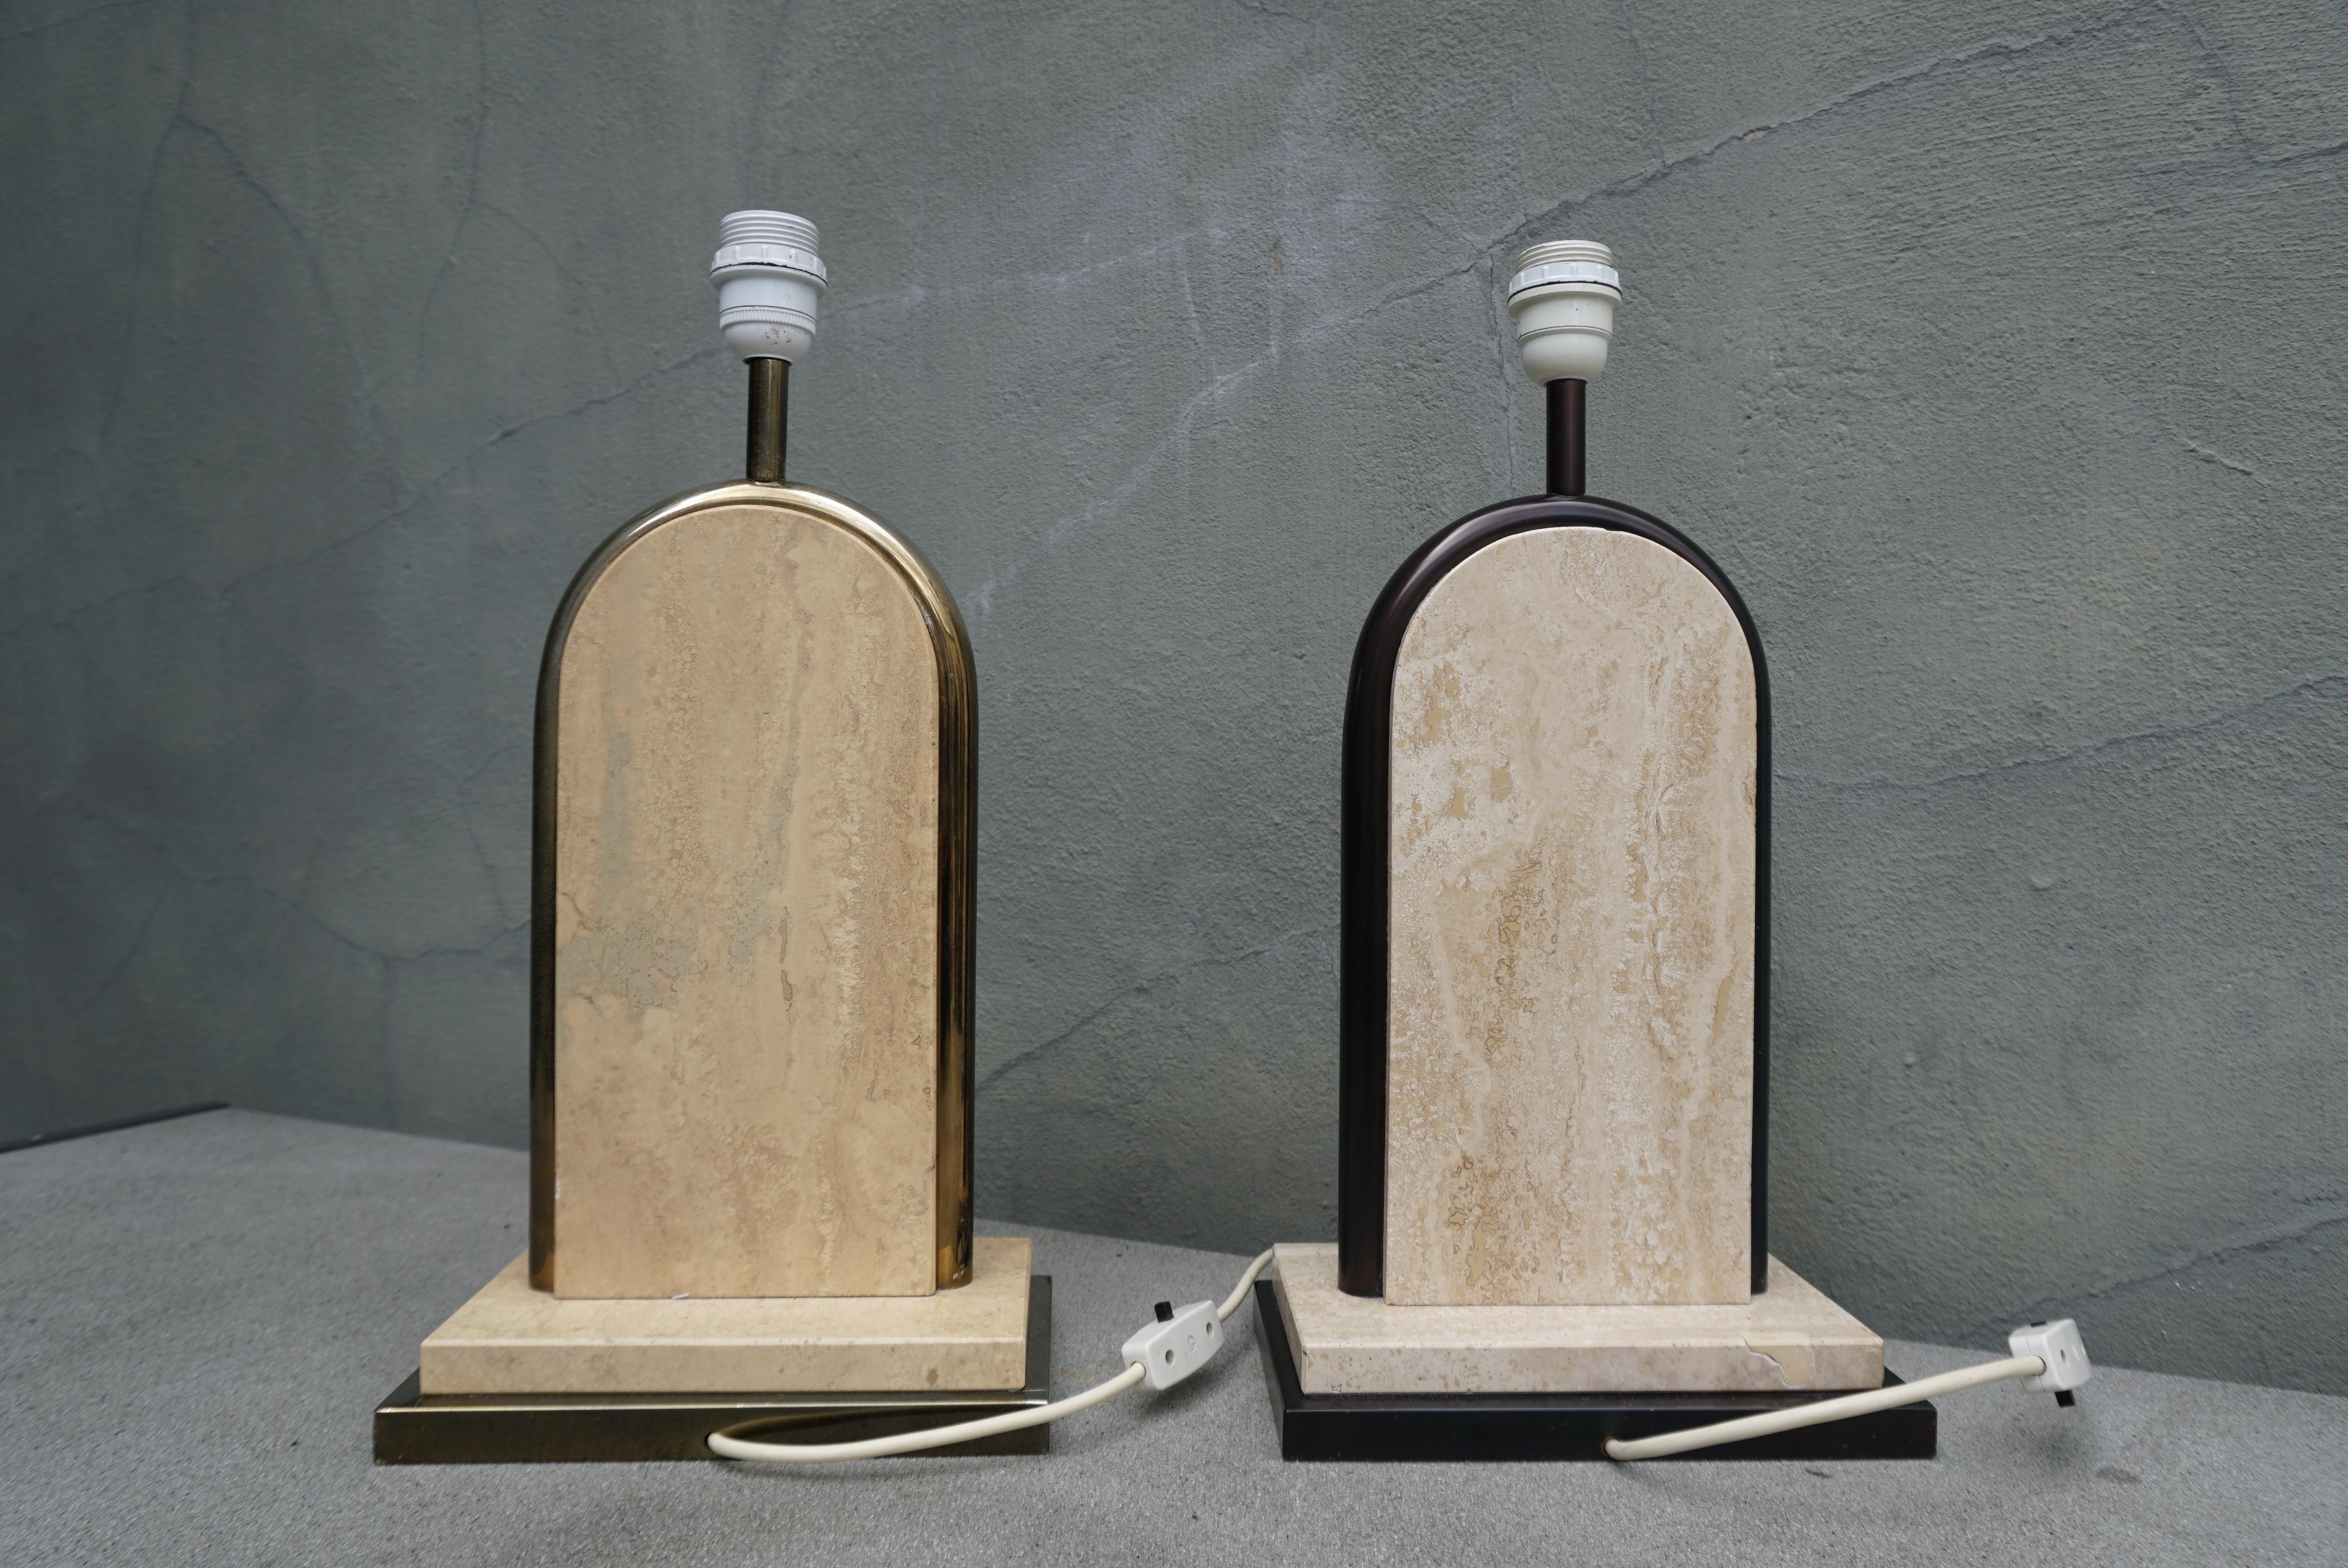 20th Century Pair of Belgian Beige Travertine and Gilt Metal Table Lamps, Belgium 1970's For Sale